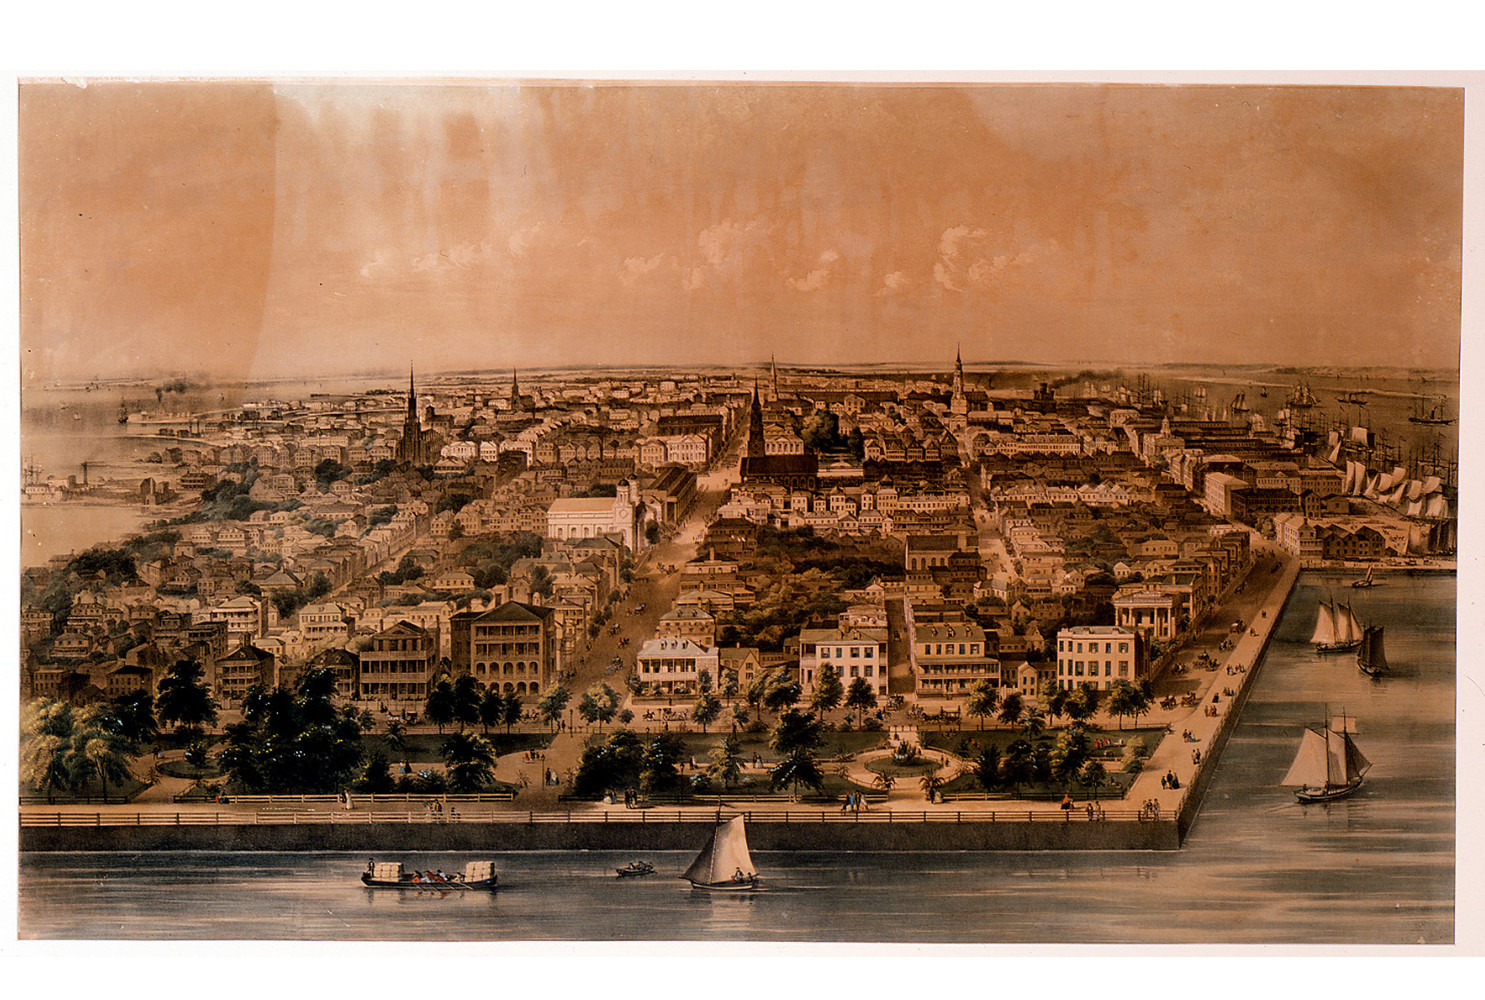 Panorama of Charleston, 1851, by John William Hill (British, 1812 – 1879). Hand-tinted lithograph. 24 x 41 ½ inches. 1918.001.0005